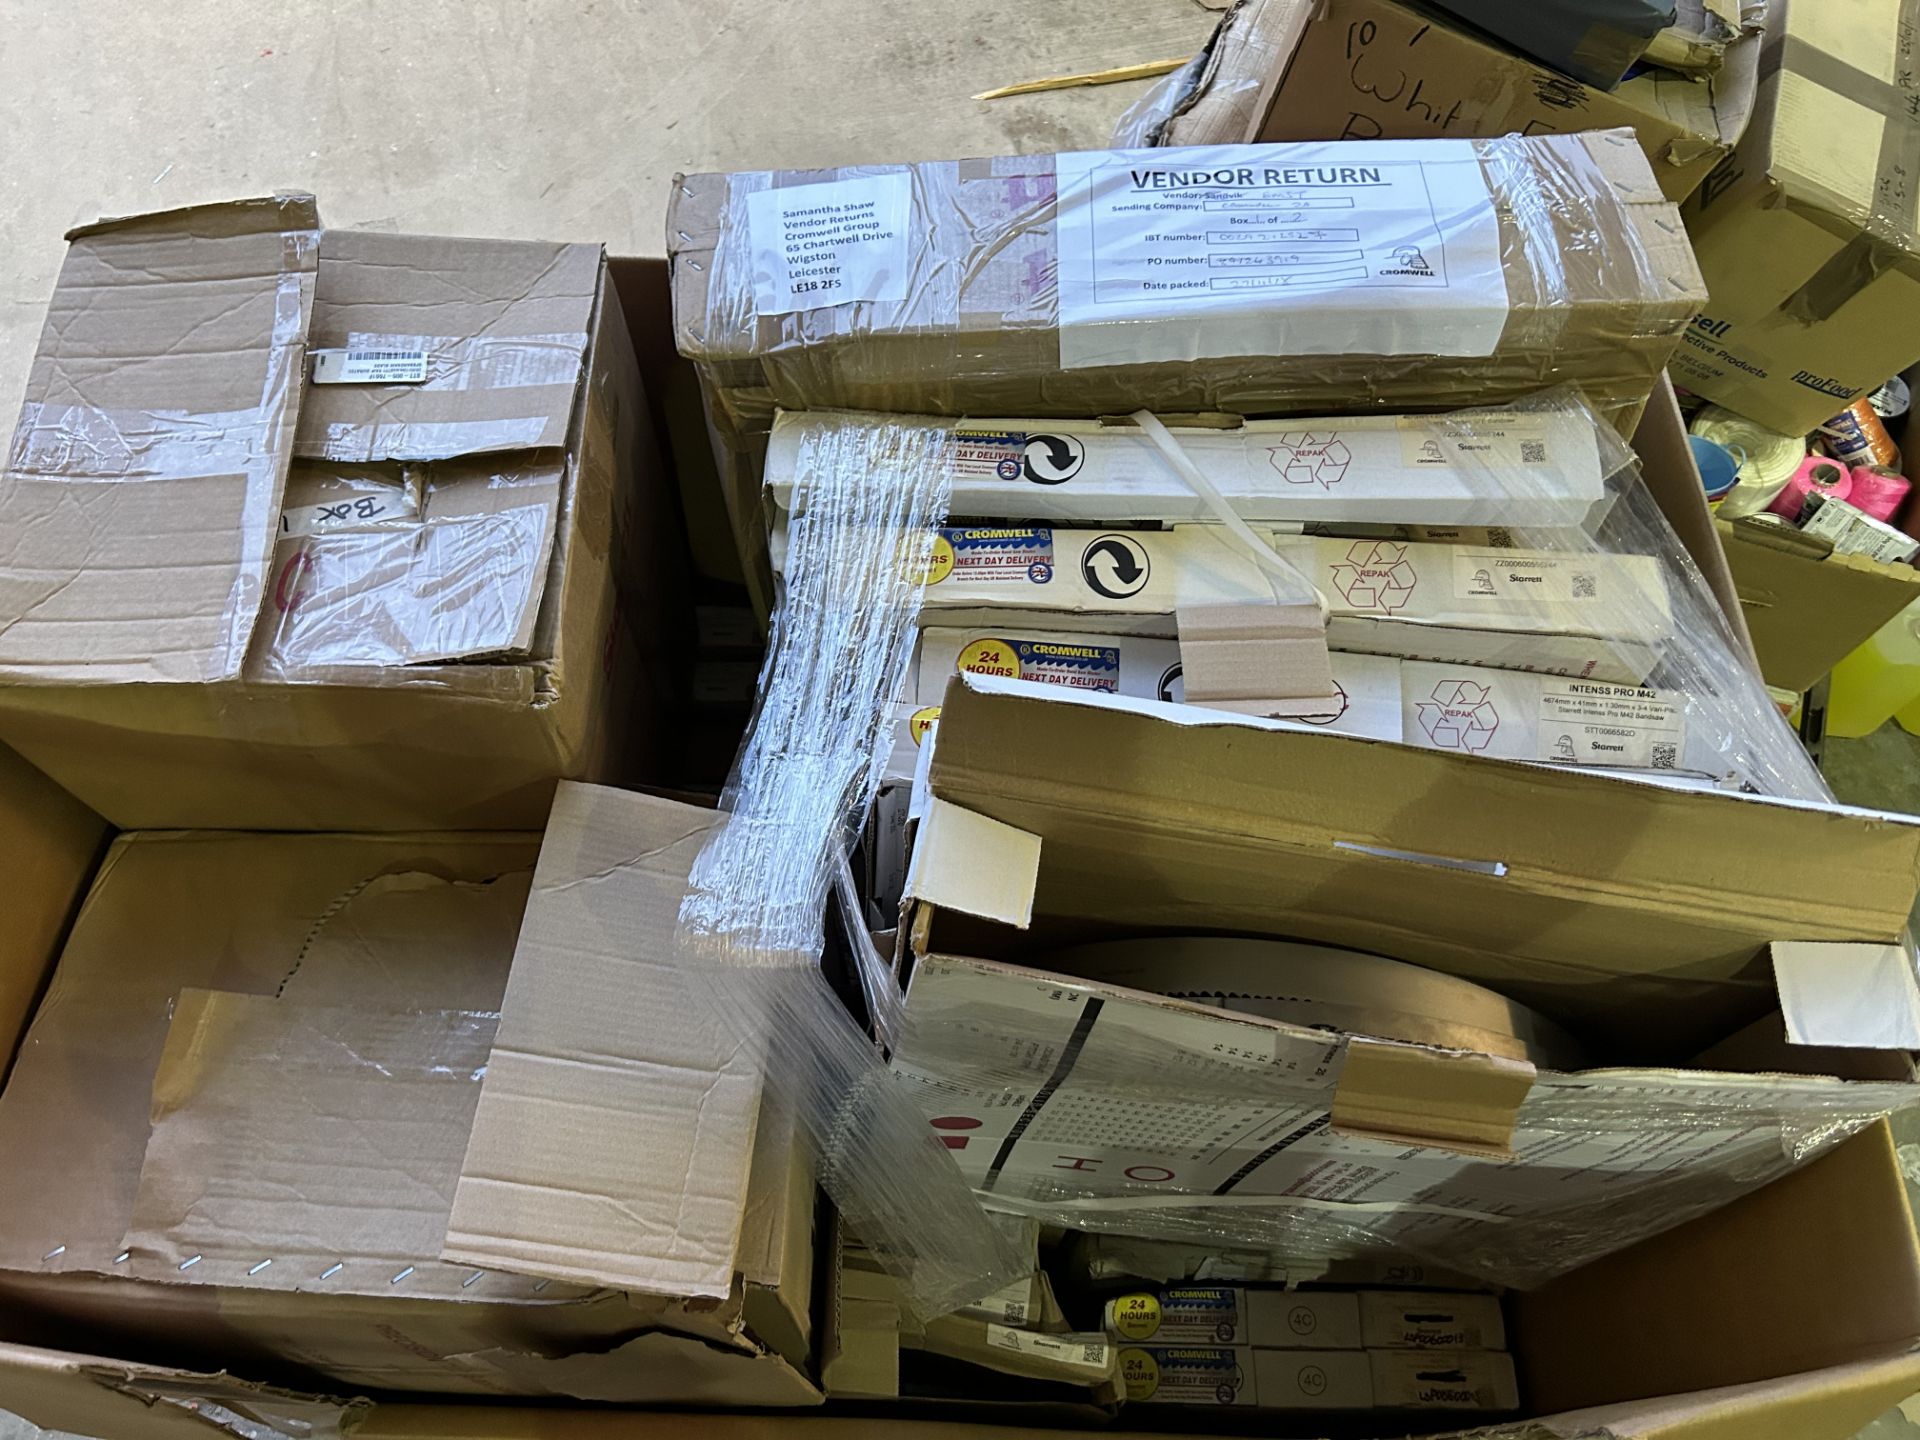 74 PACKS OF 3x STARRETT BANDSAWS IN BOXES NEW (222x BAND SAWS IN TOTAL) - Image 2 of 3